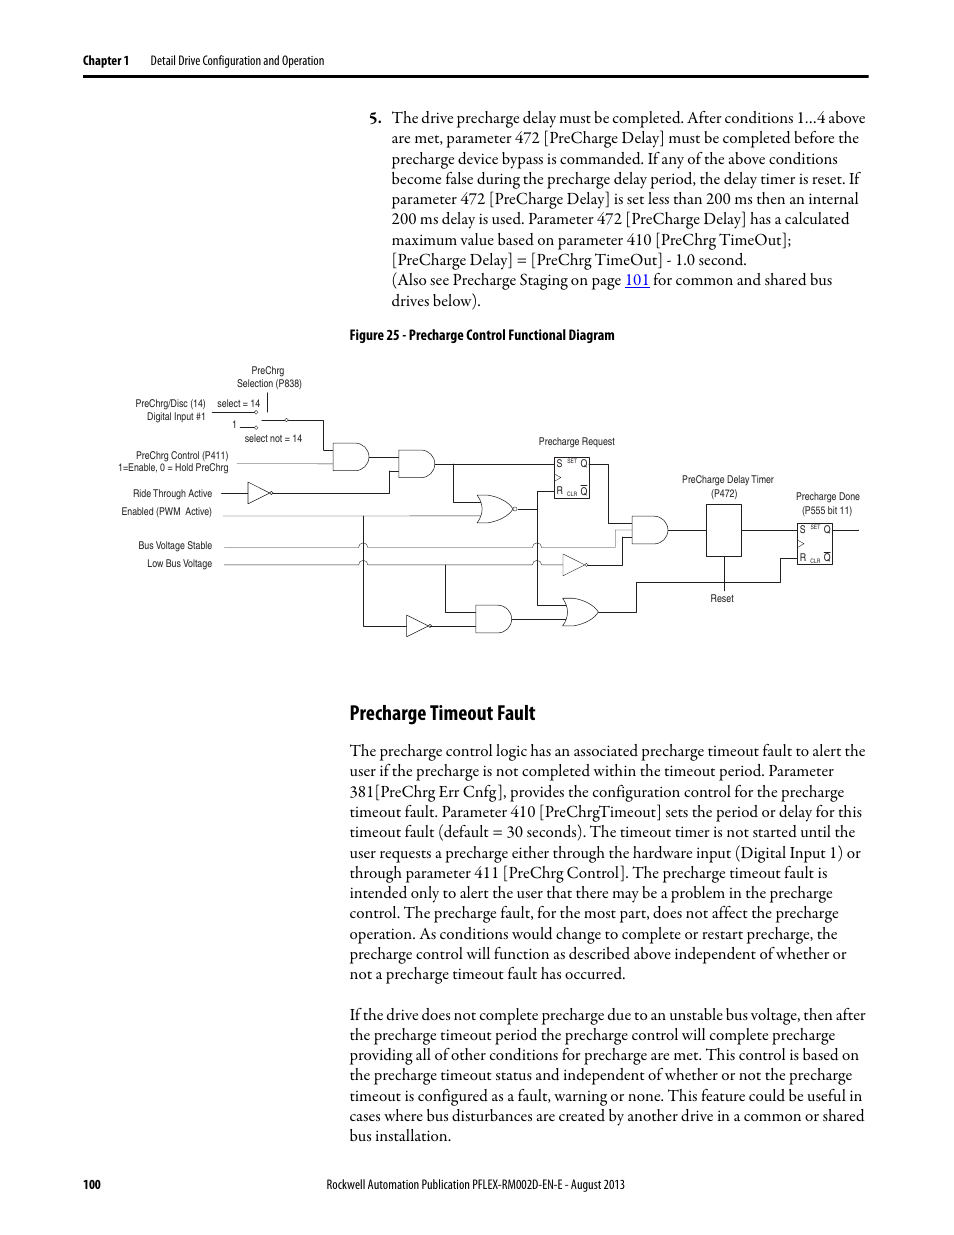 Precharge timeout fault, Figure 25 - precharge control functional diagram | Rockwell Automation 20D PowerFlex 700S with Phase I Control Reference Manual User Manual | Page 100 / 190